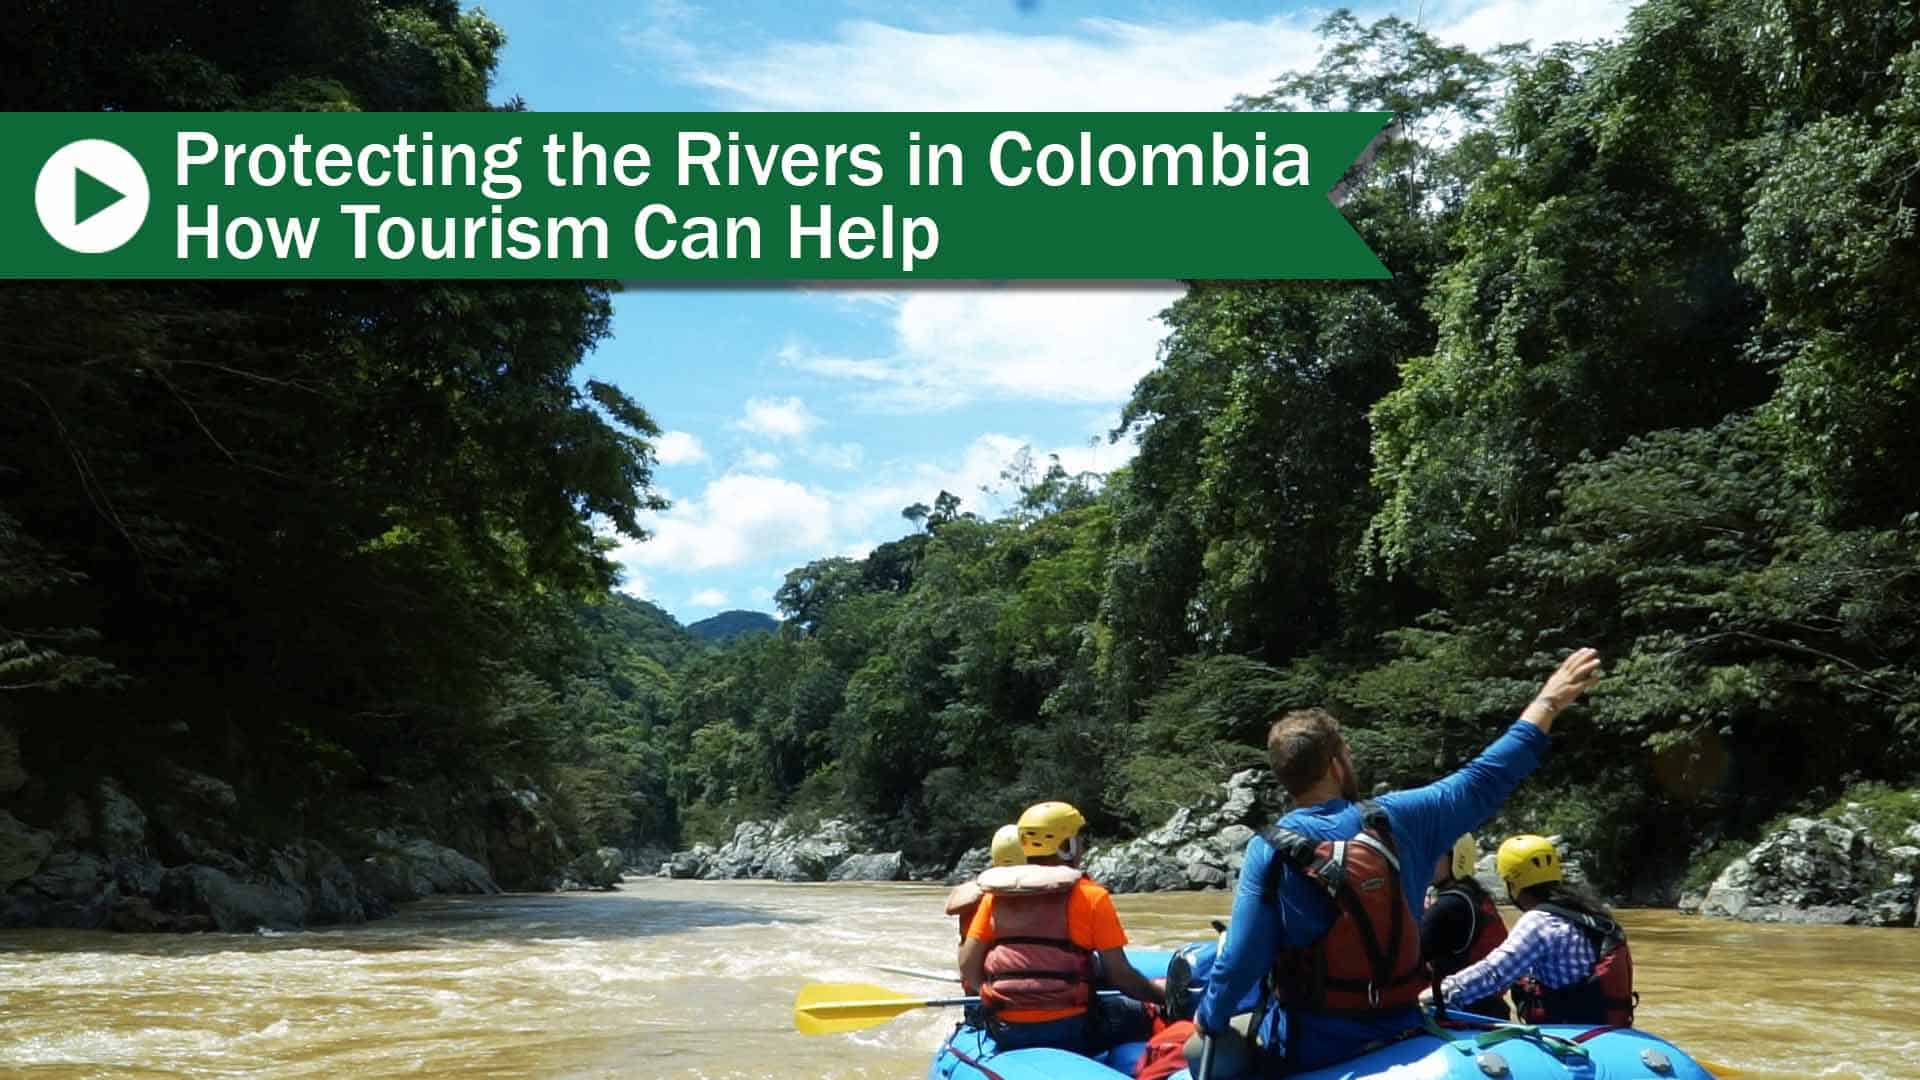 Rivers in Colombia